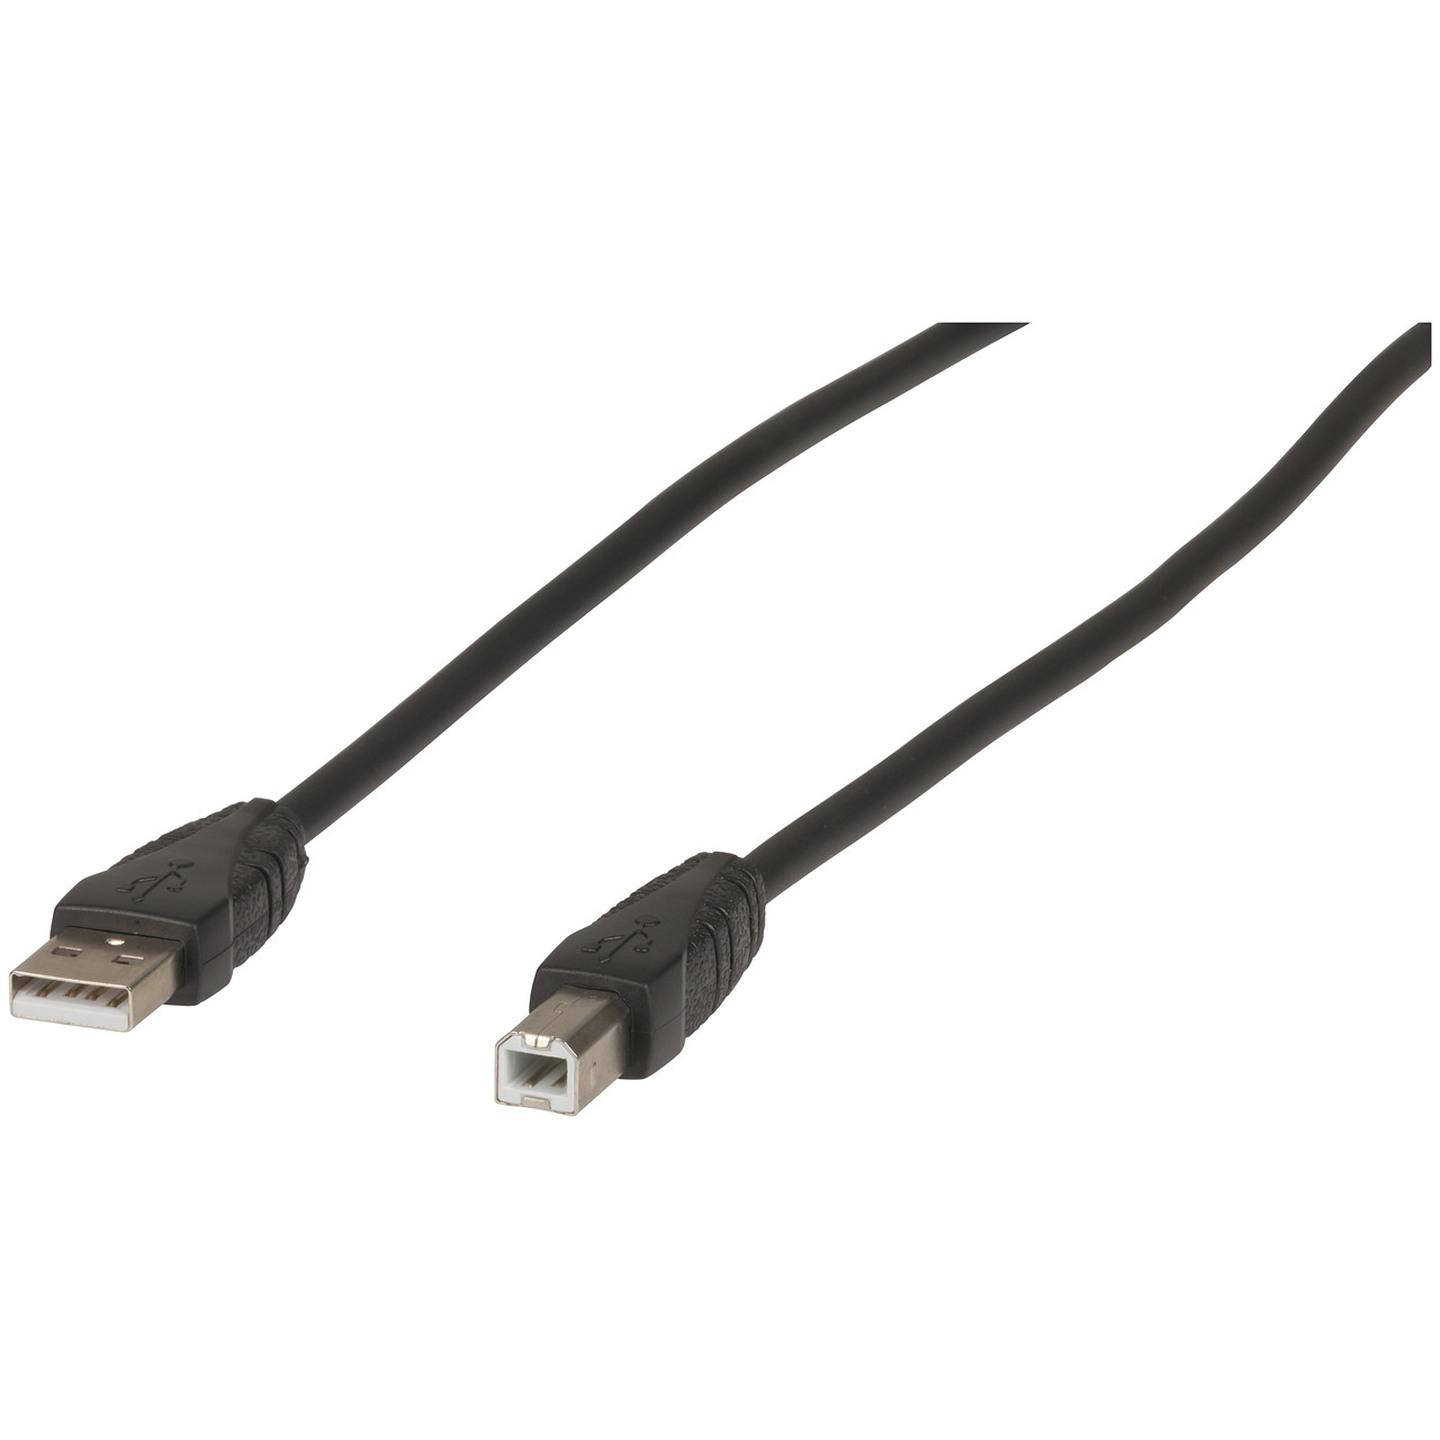 USB 2.0 A to B Cable 1.8m